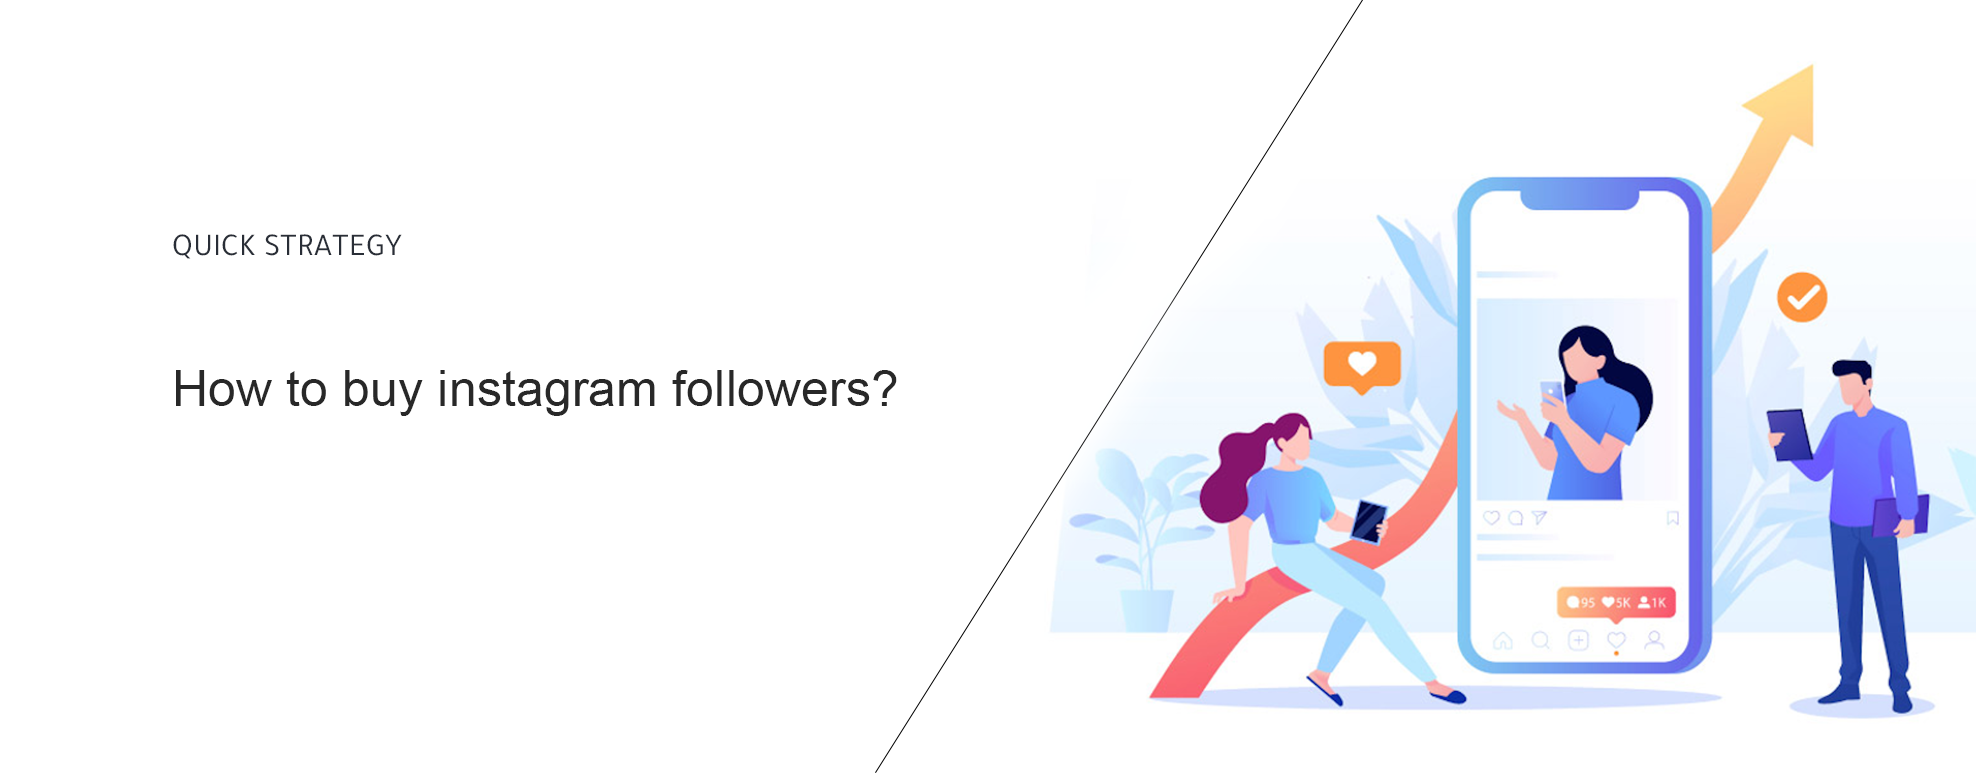 How to buy instagram followers?